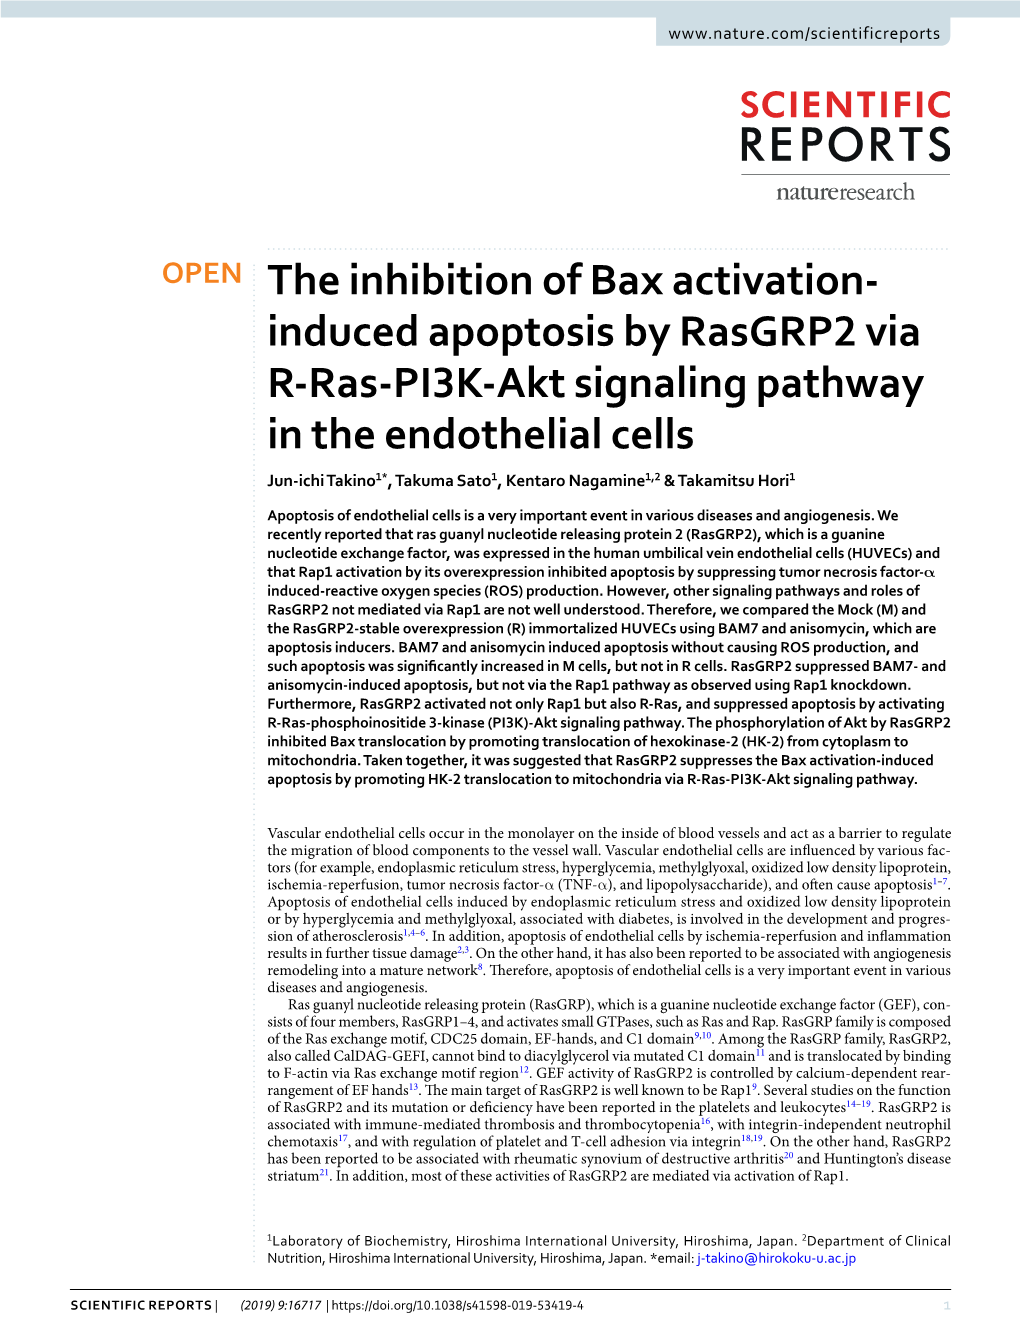 The Inhibition of Bax Activation-Induced Apoptosis By